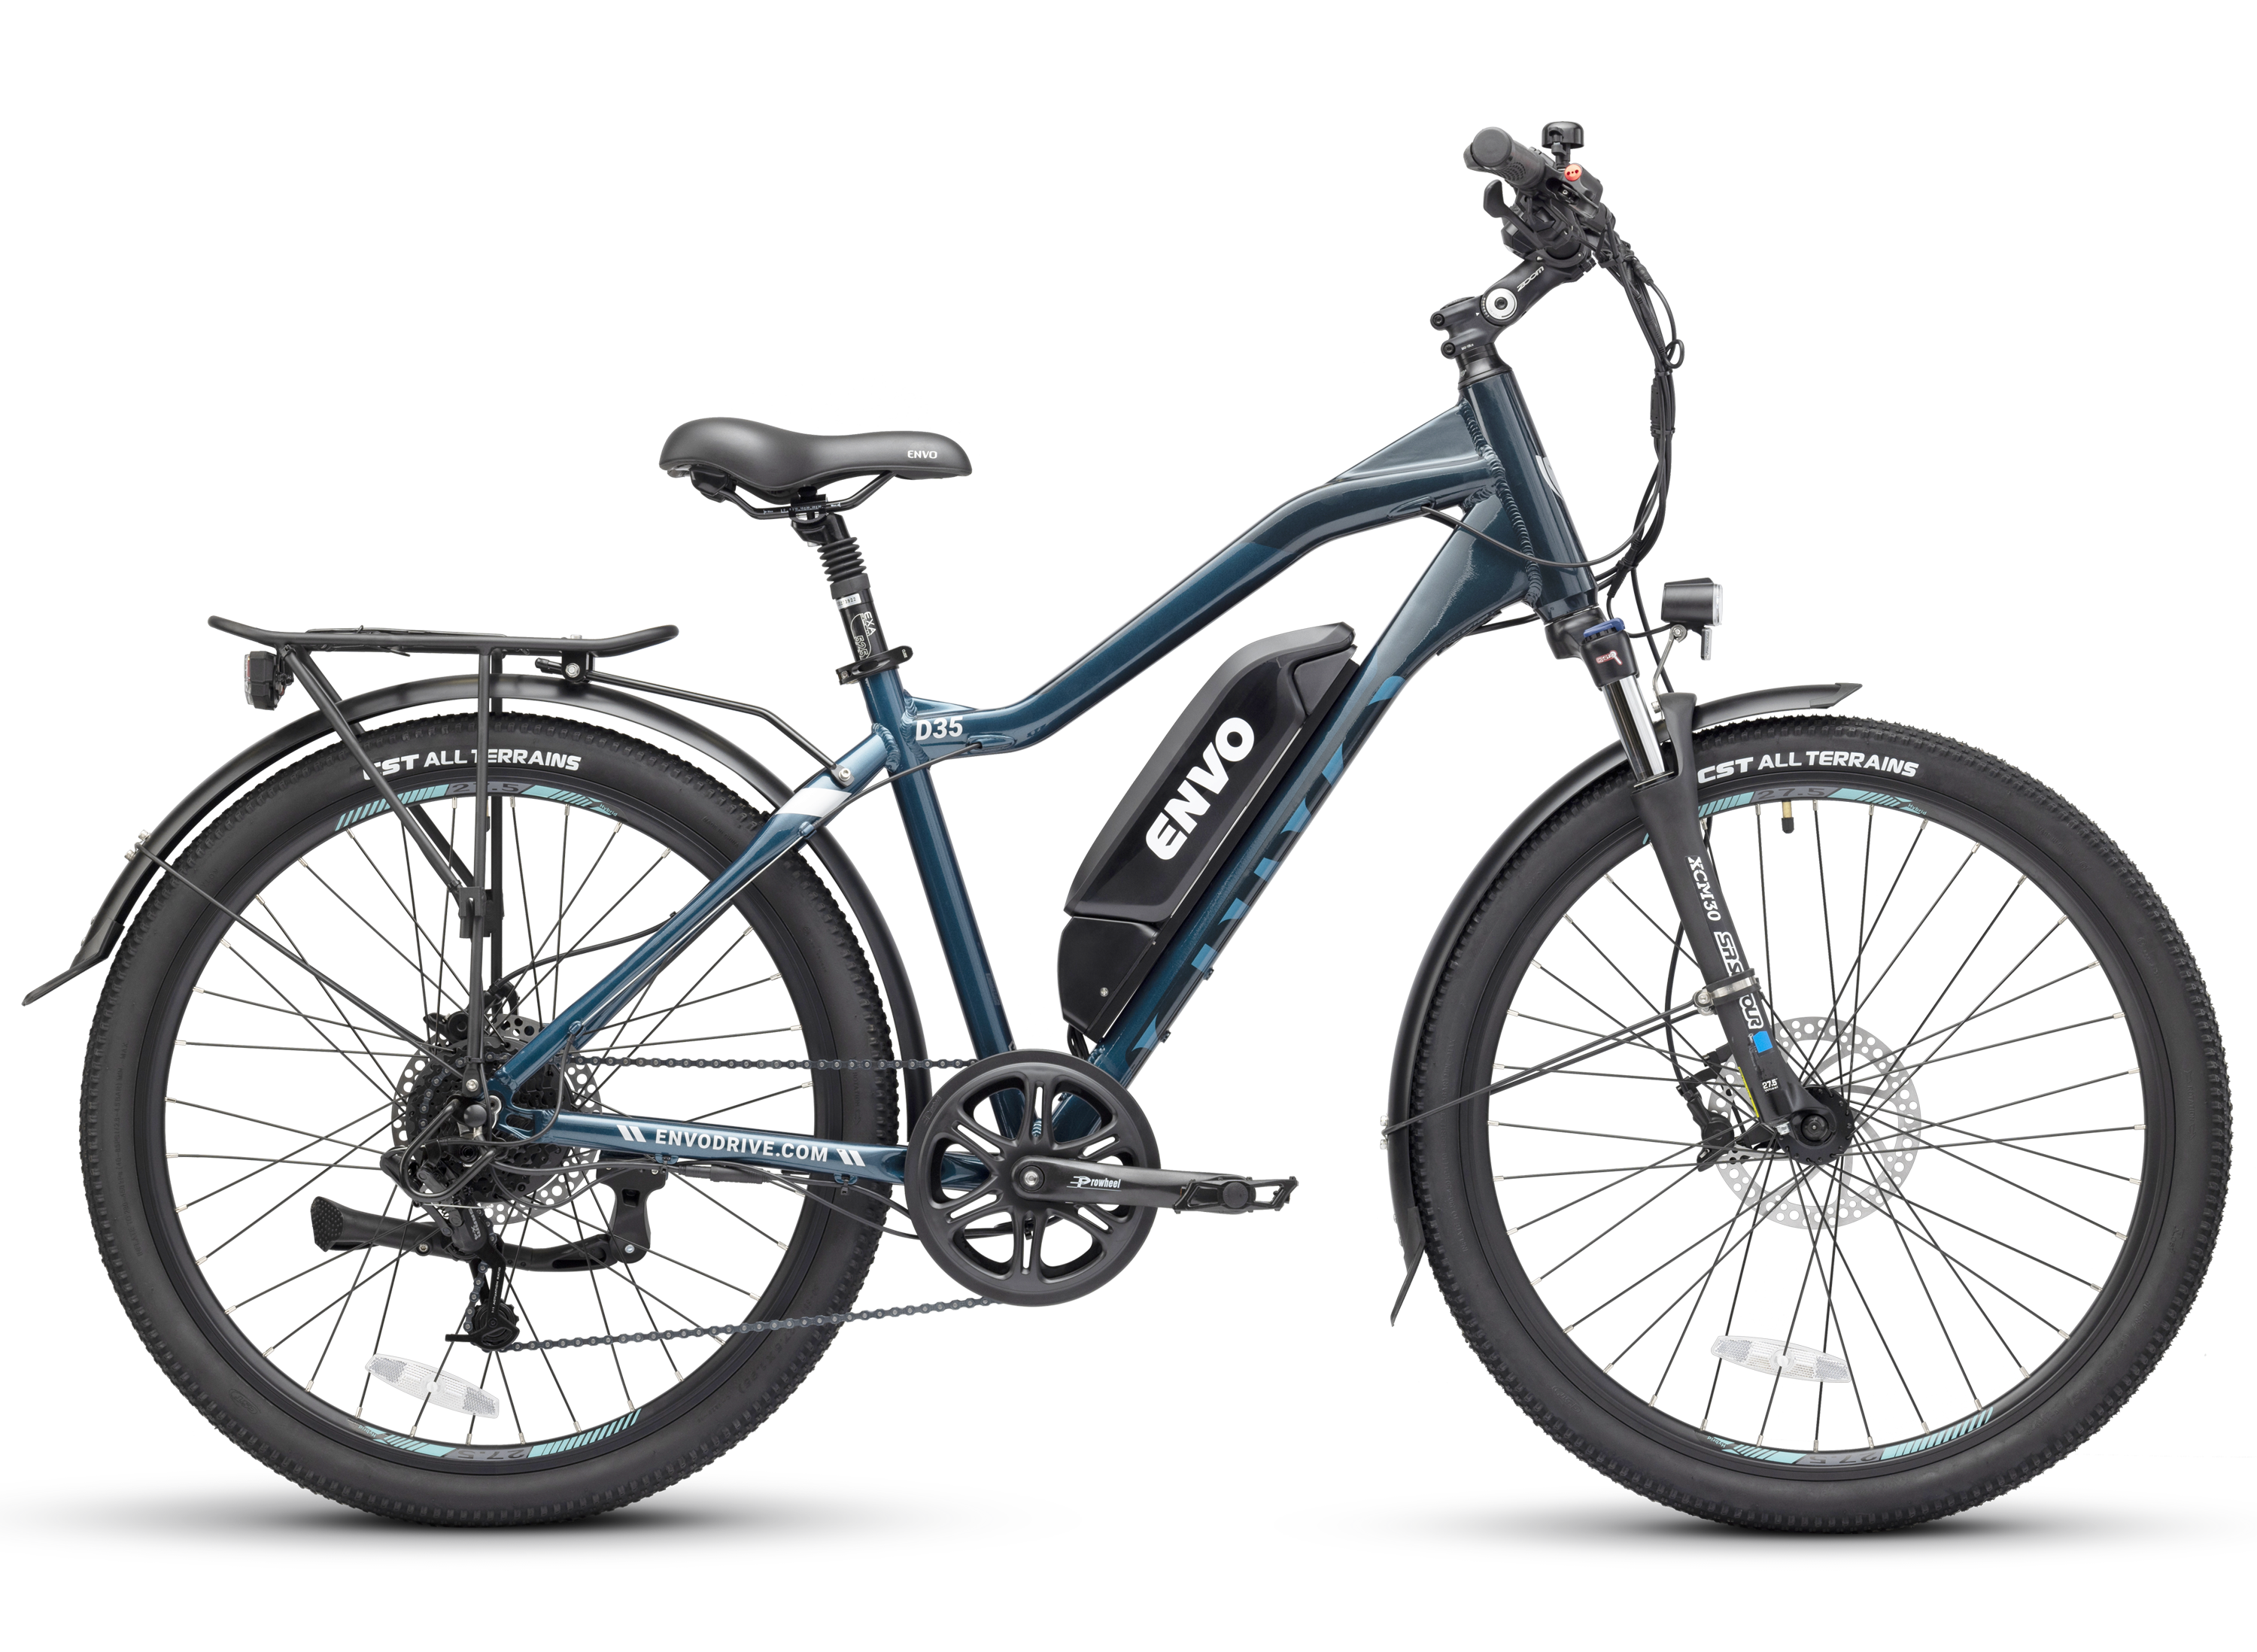 side view of the ENVO D35 eBike teal color